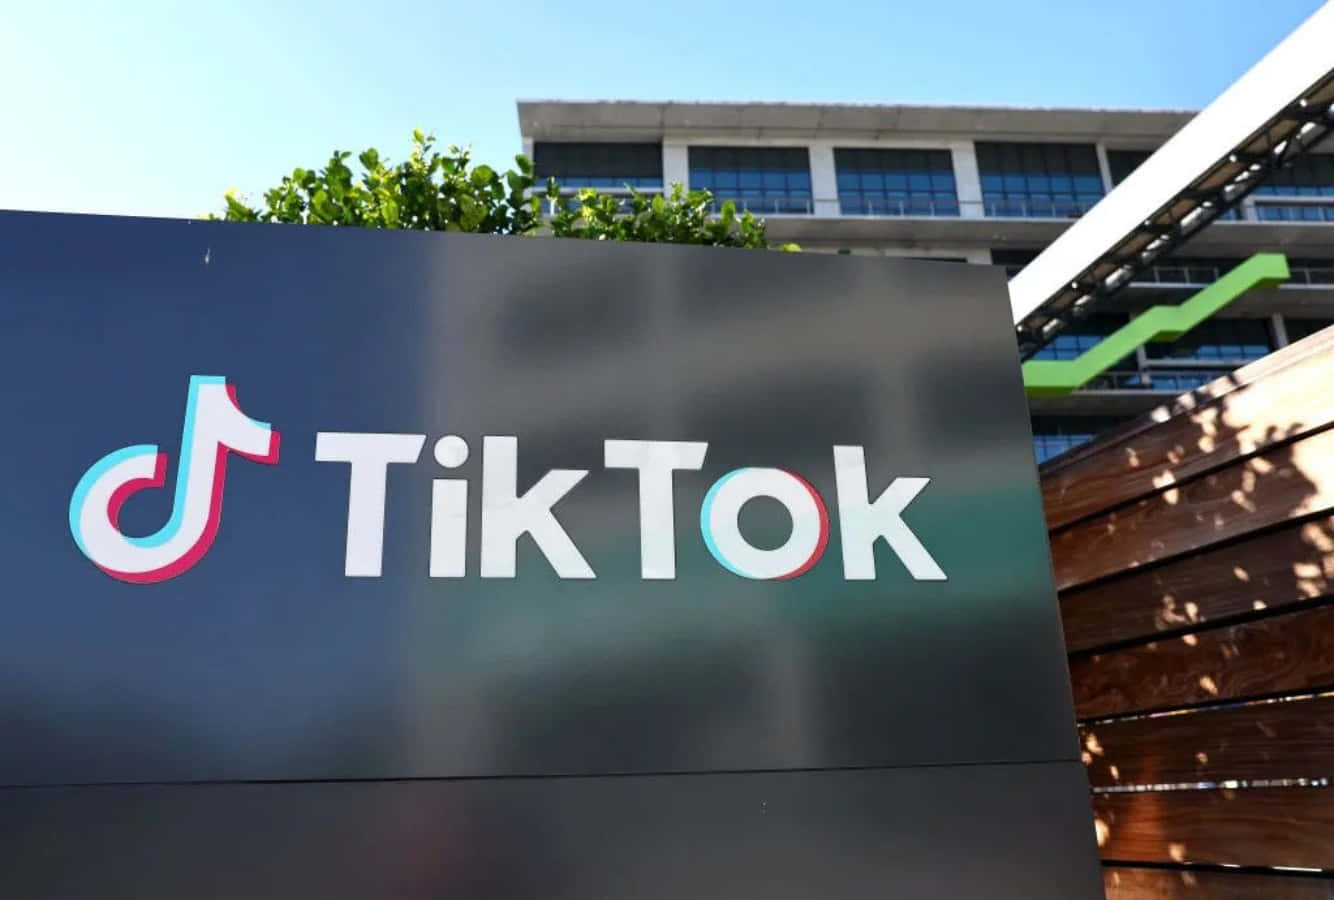 Tiktok's Headquarters Is Seen In Front Of A Building